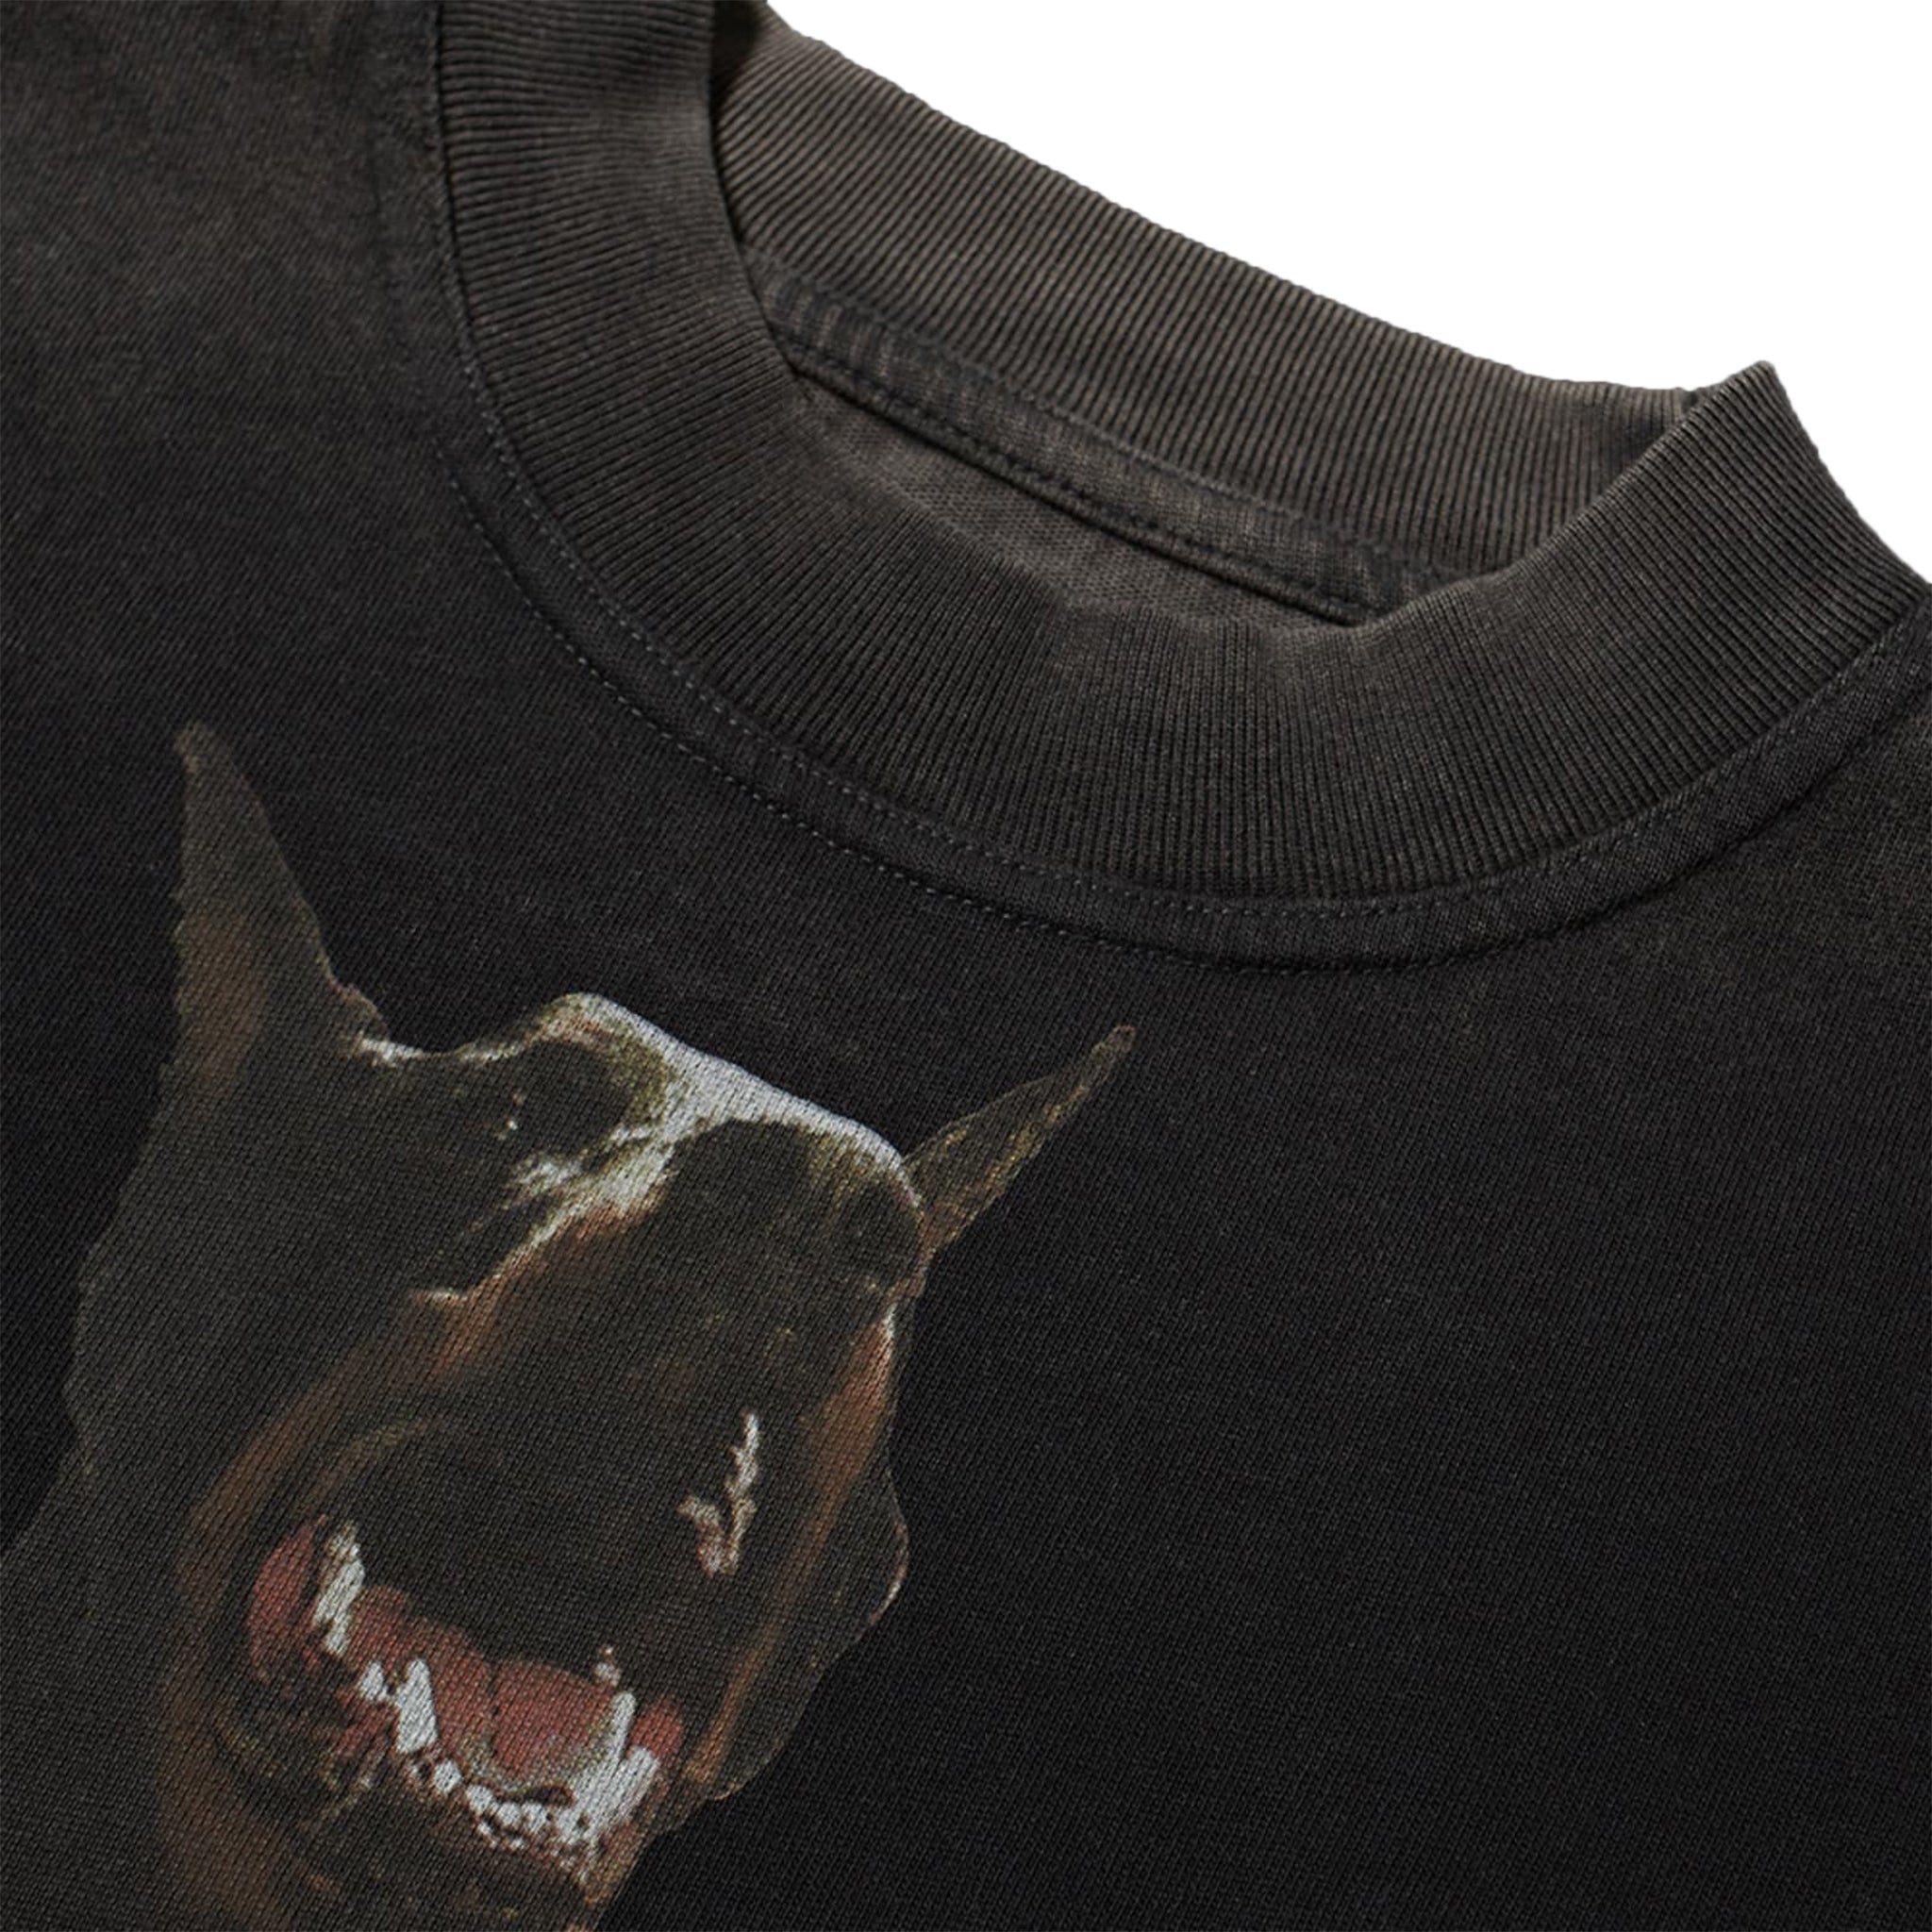 Neck view of Represent Thoroughbred Vintage Black T Shirt M05147-03